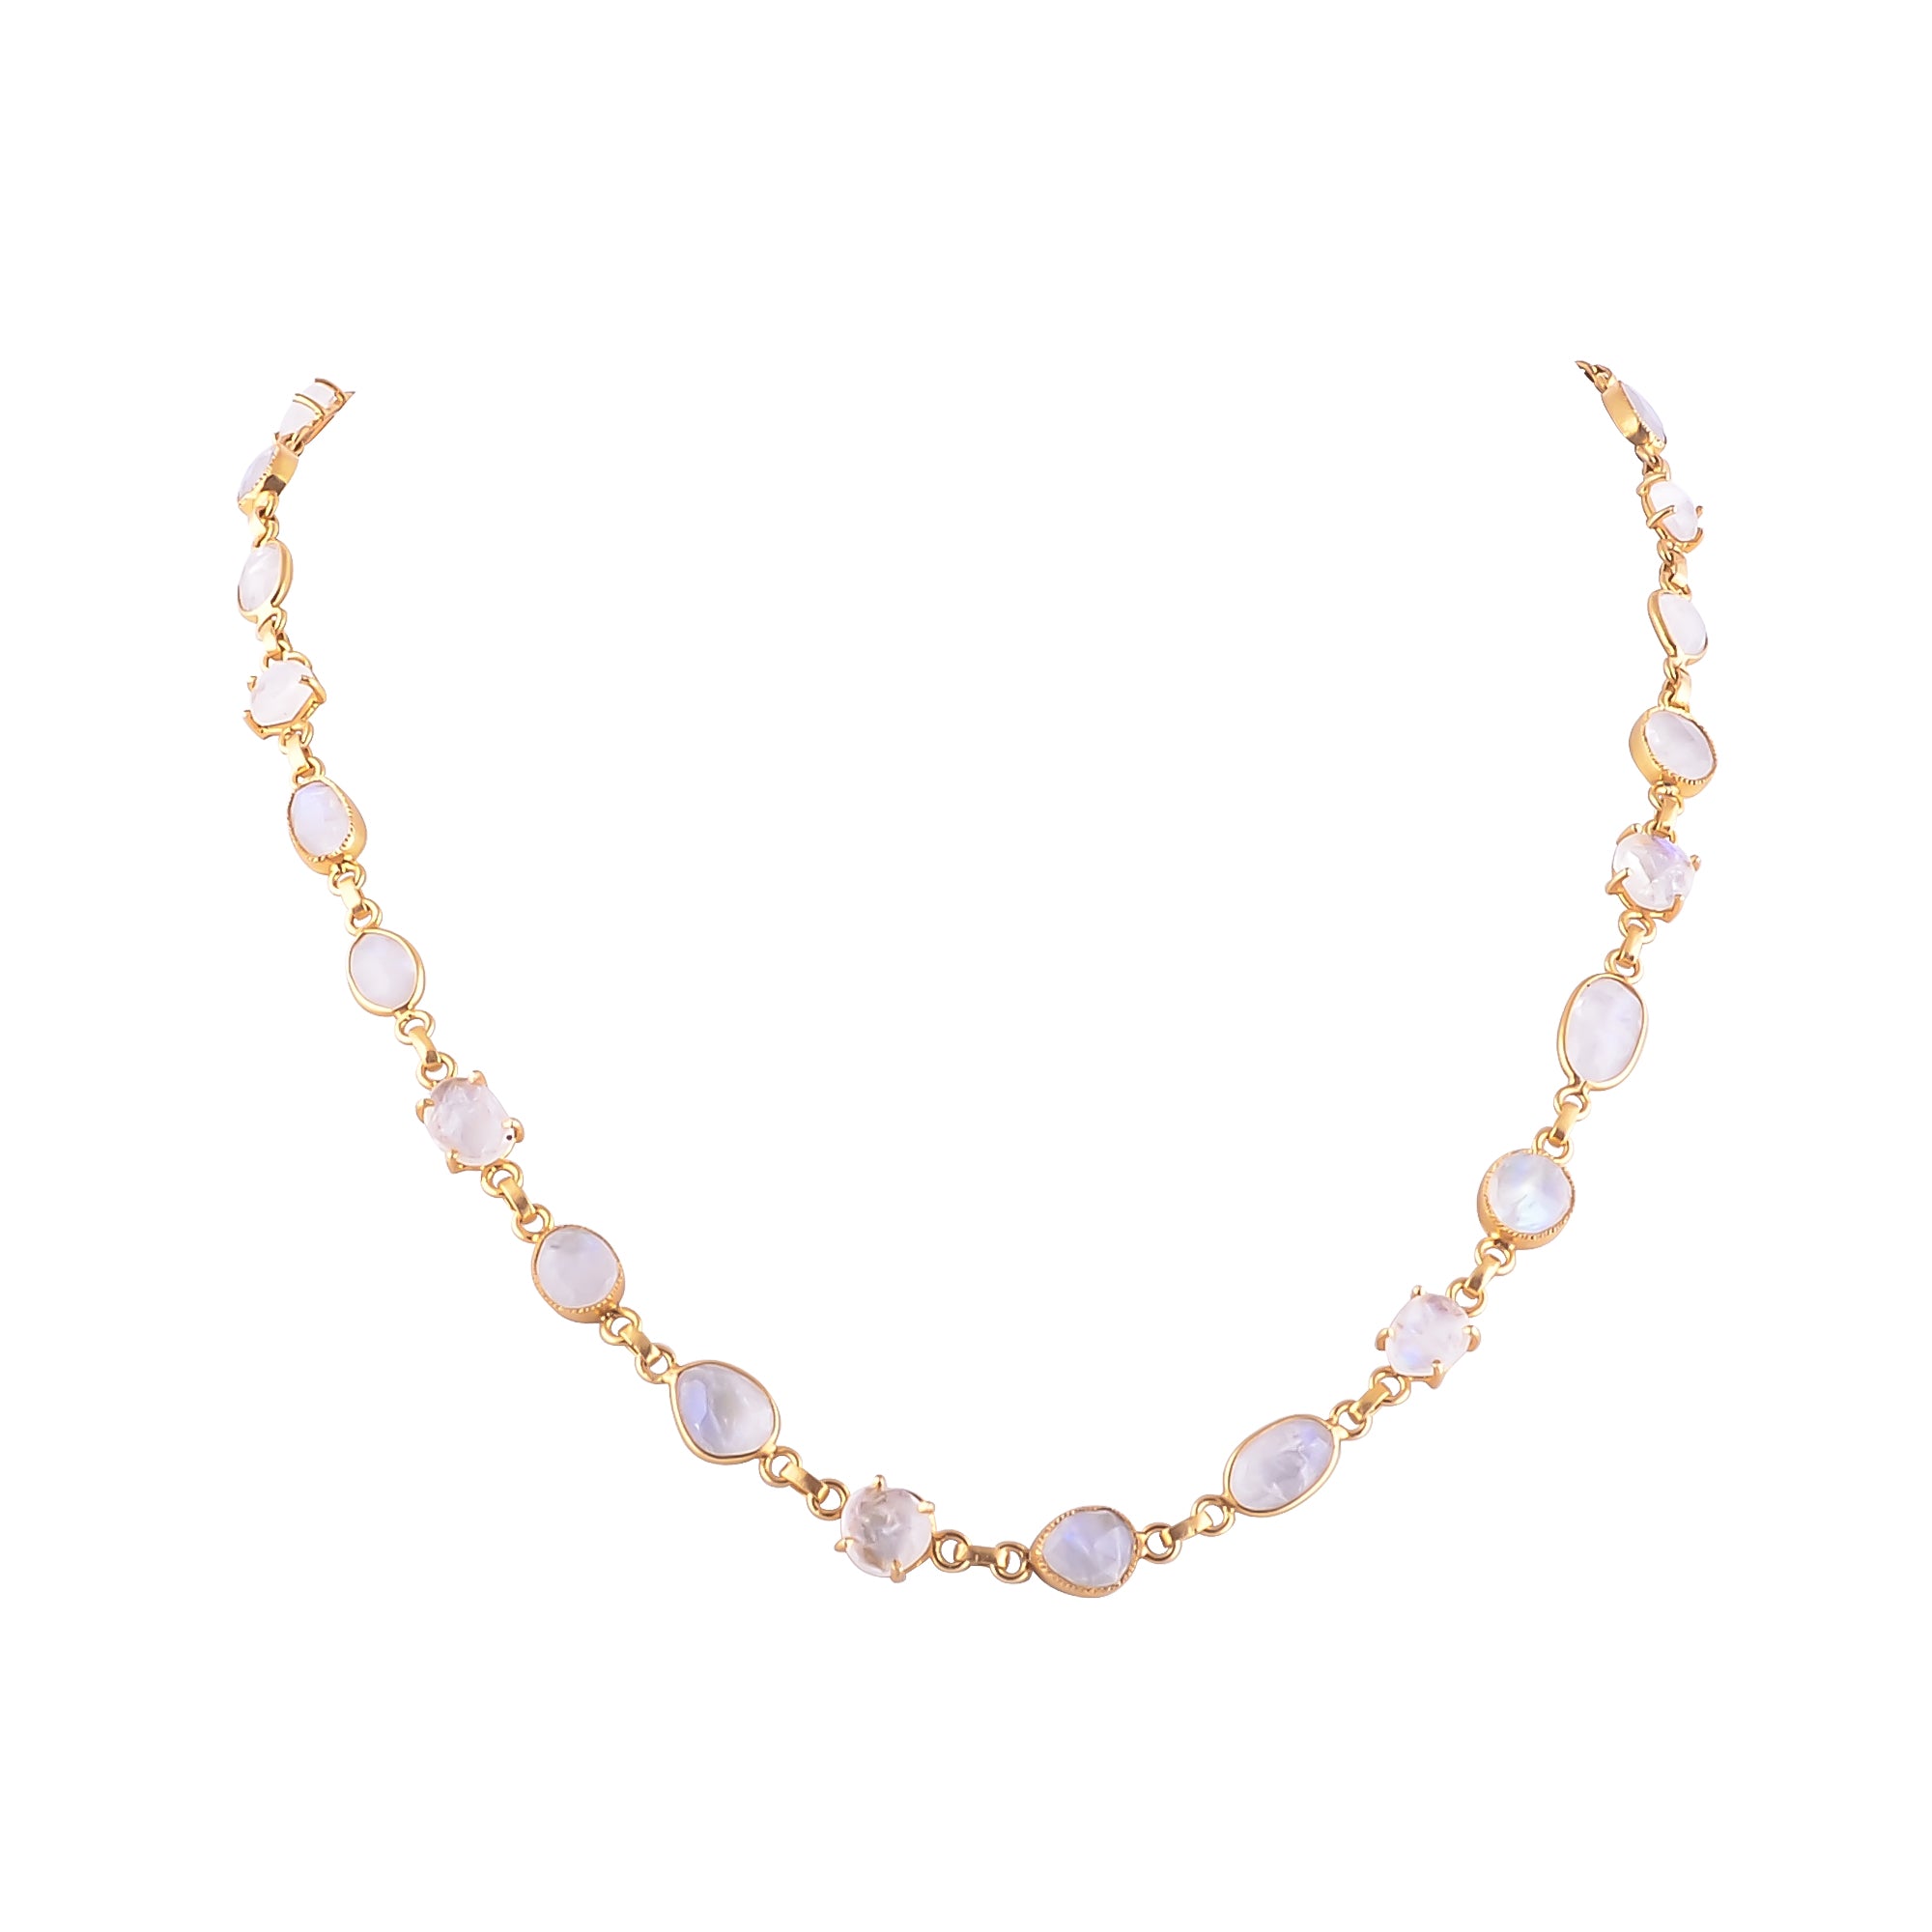 Buy Indian Handmade Silver Gold Plated Rainbow Moonstone Necklace